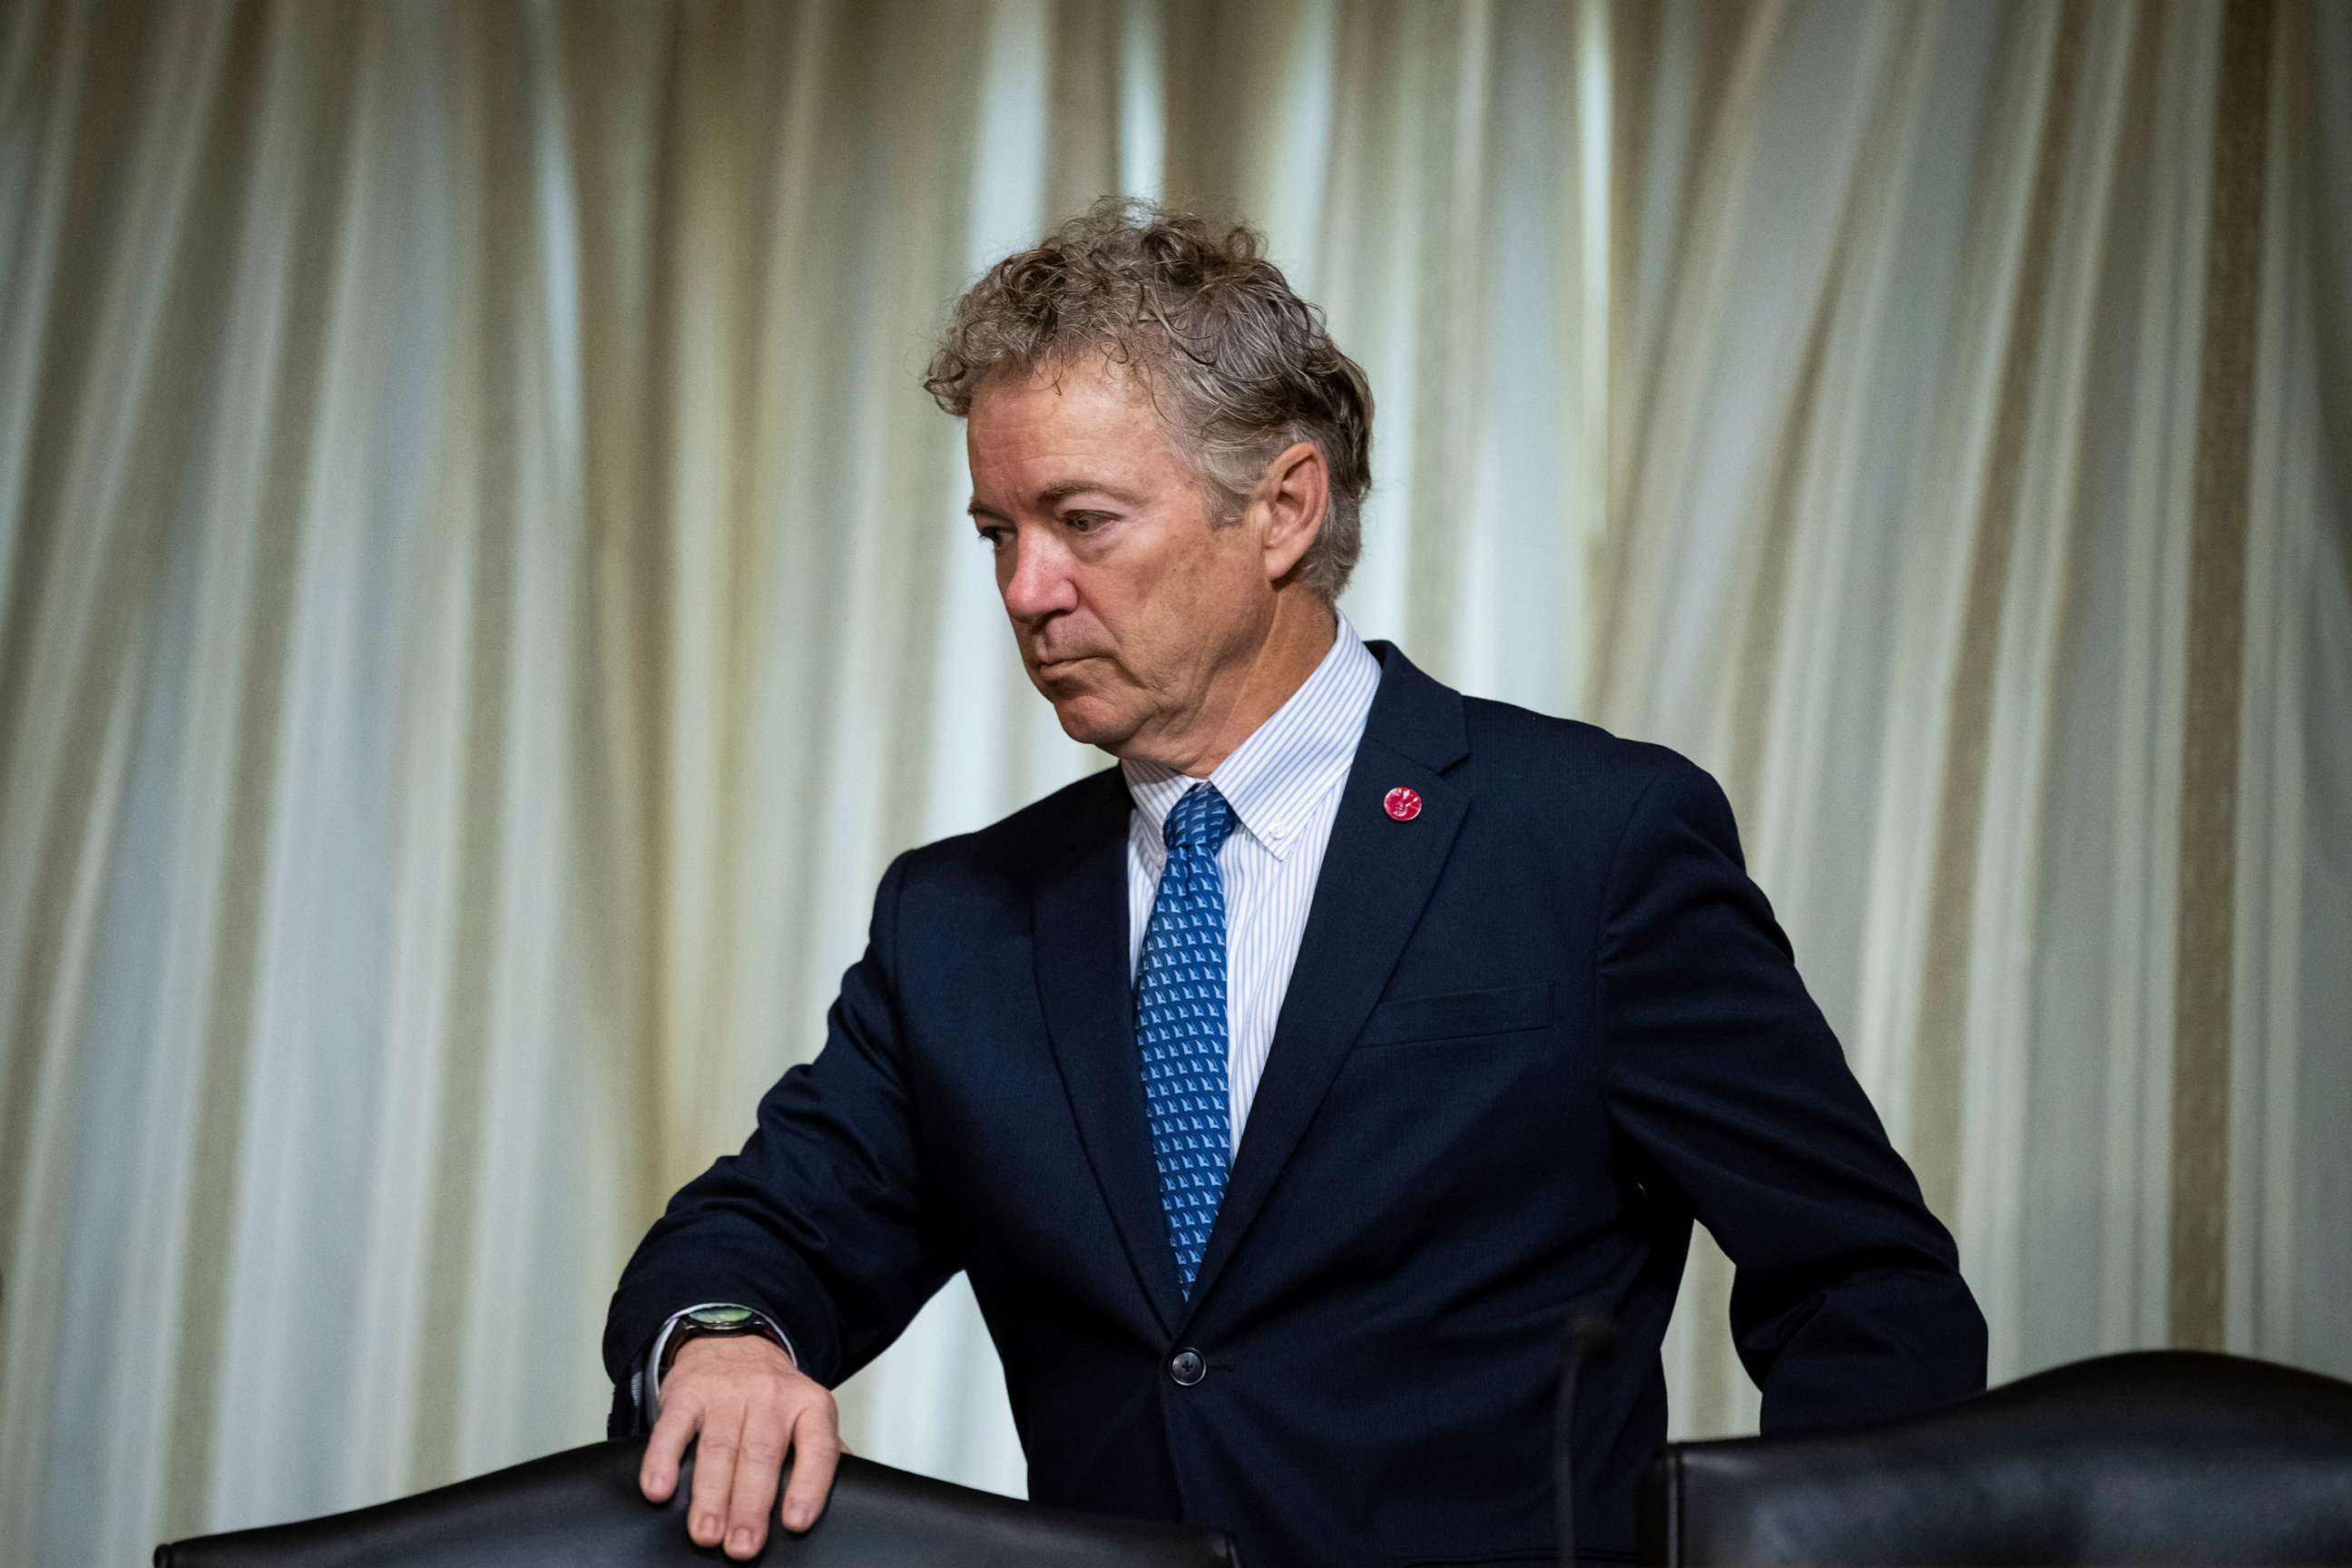 PHOTO: Senator Rand Paul (R-KY) arrives during a Senate Foreign Relations Committee hearing on evaluating U.S.-China policy, at the Capitol, in Washington, D.C., on Feb. 9, 2023.